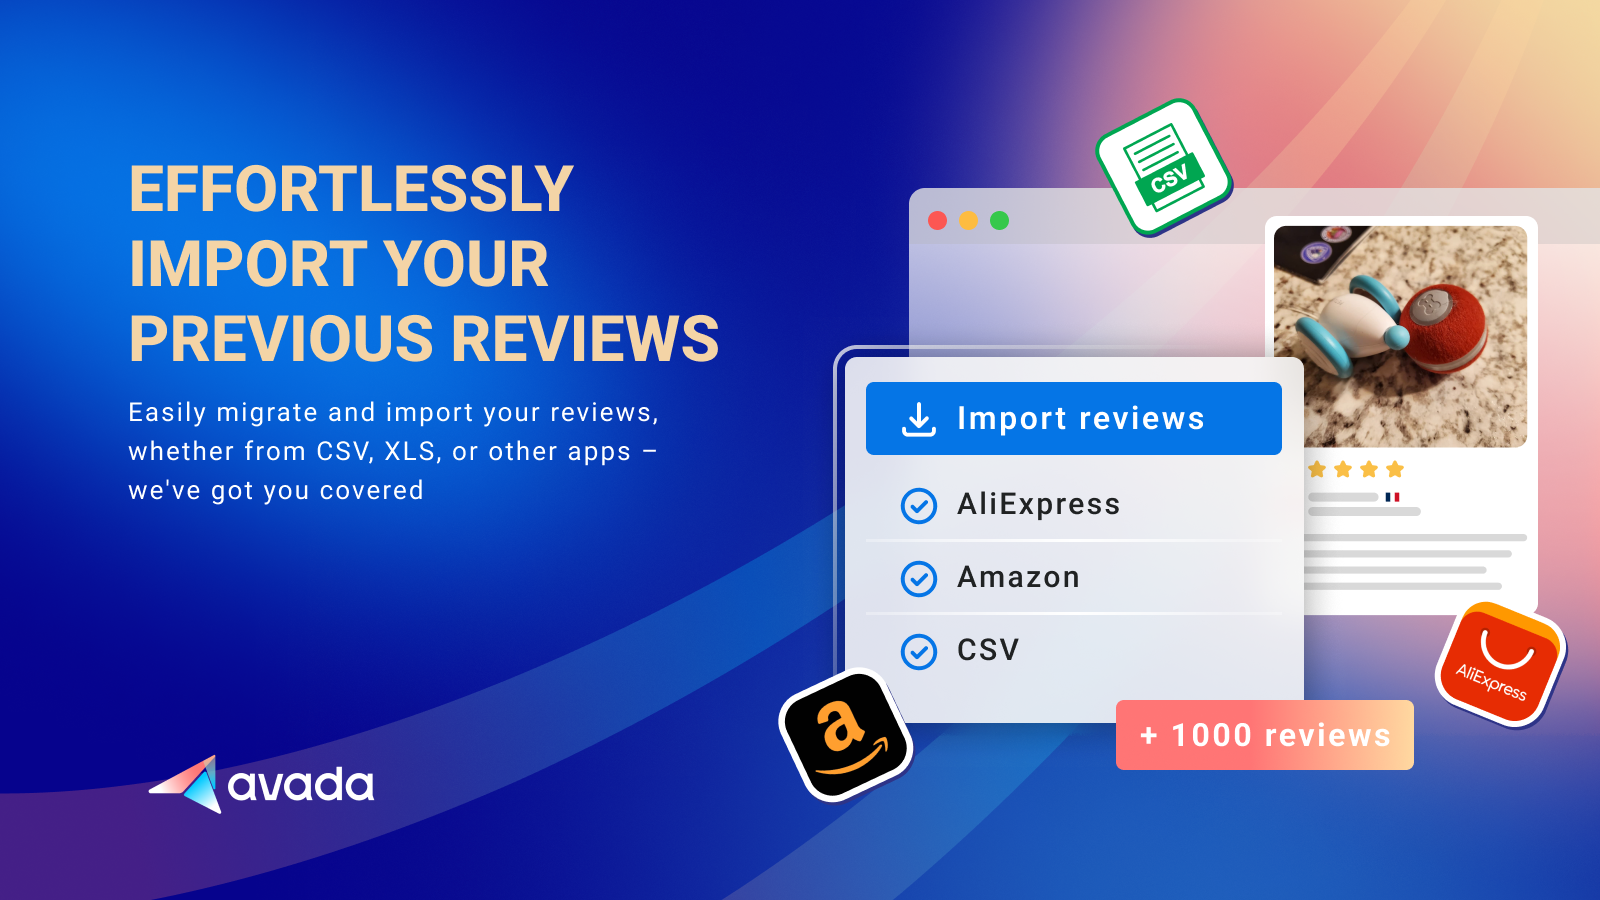 INSTANT REVIEW IMPORT